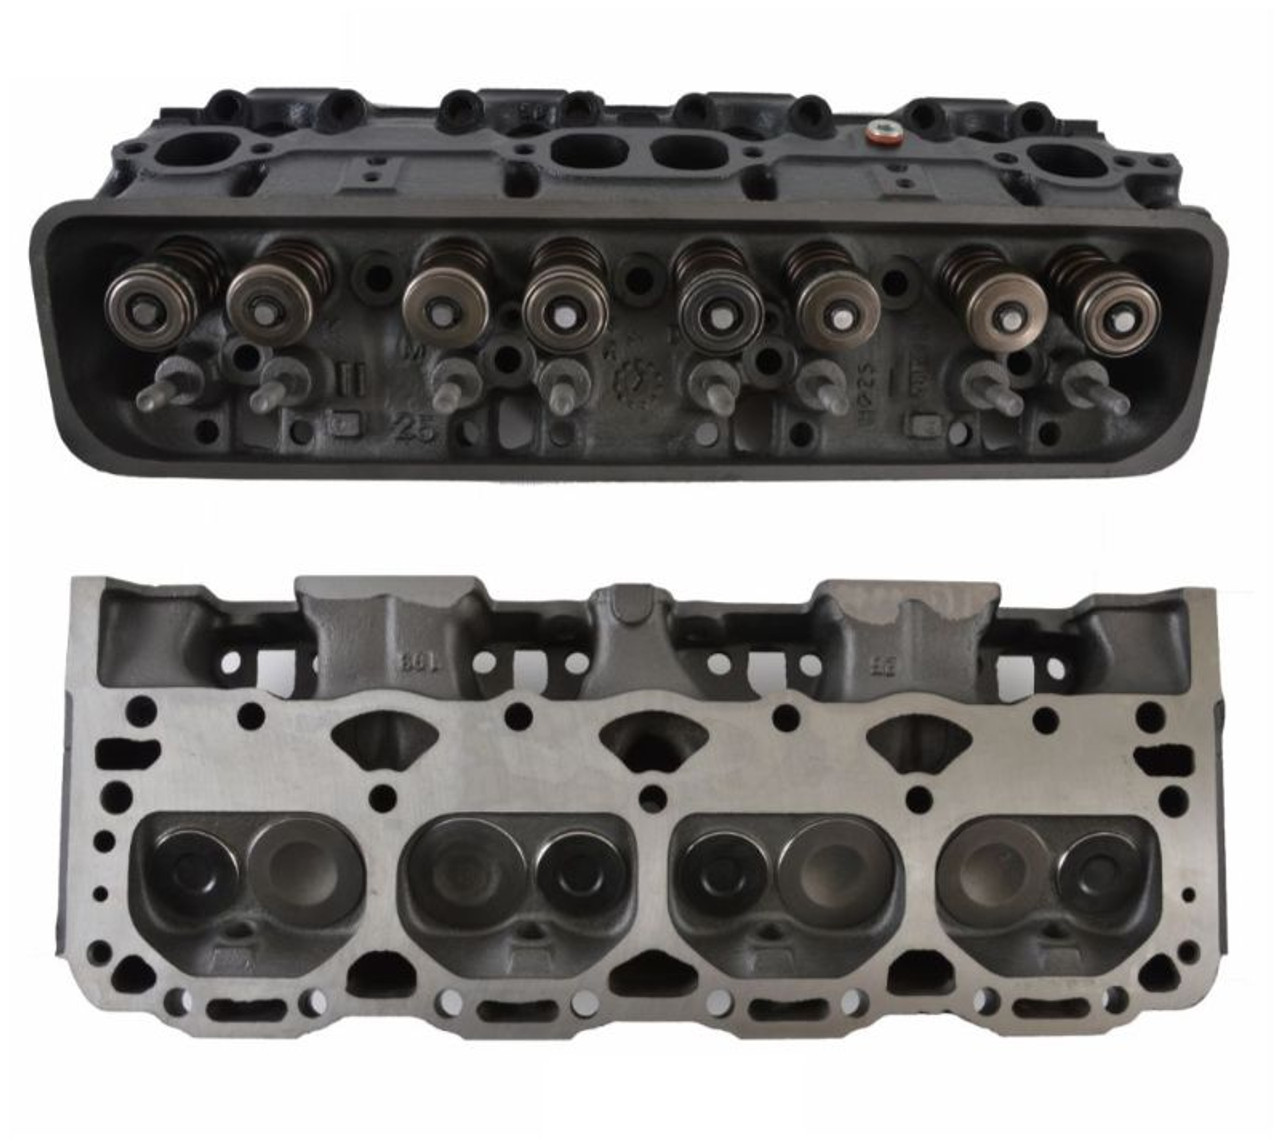 Cylinder Head Assembly - 1995 Chevrolet C1500 5.7L (CH1065R.K263)